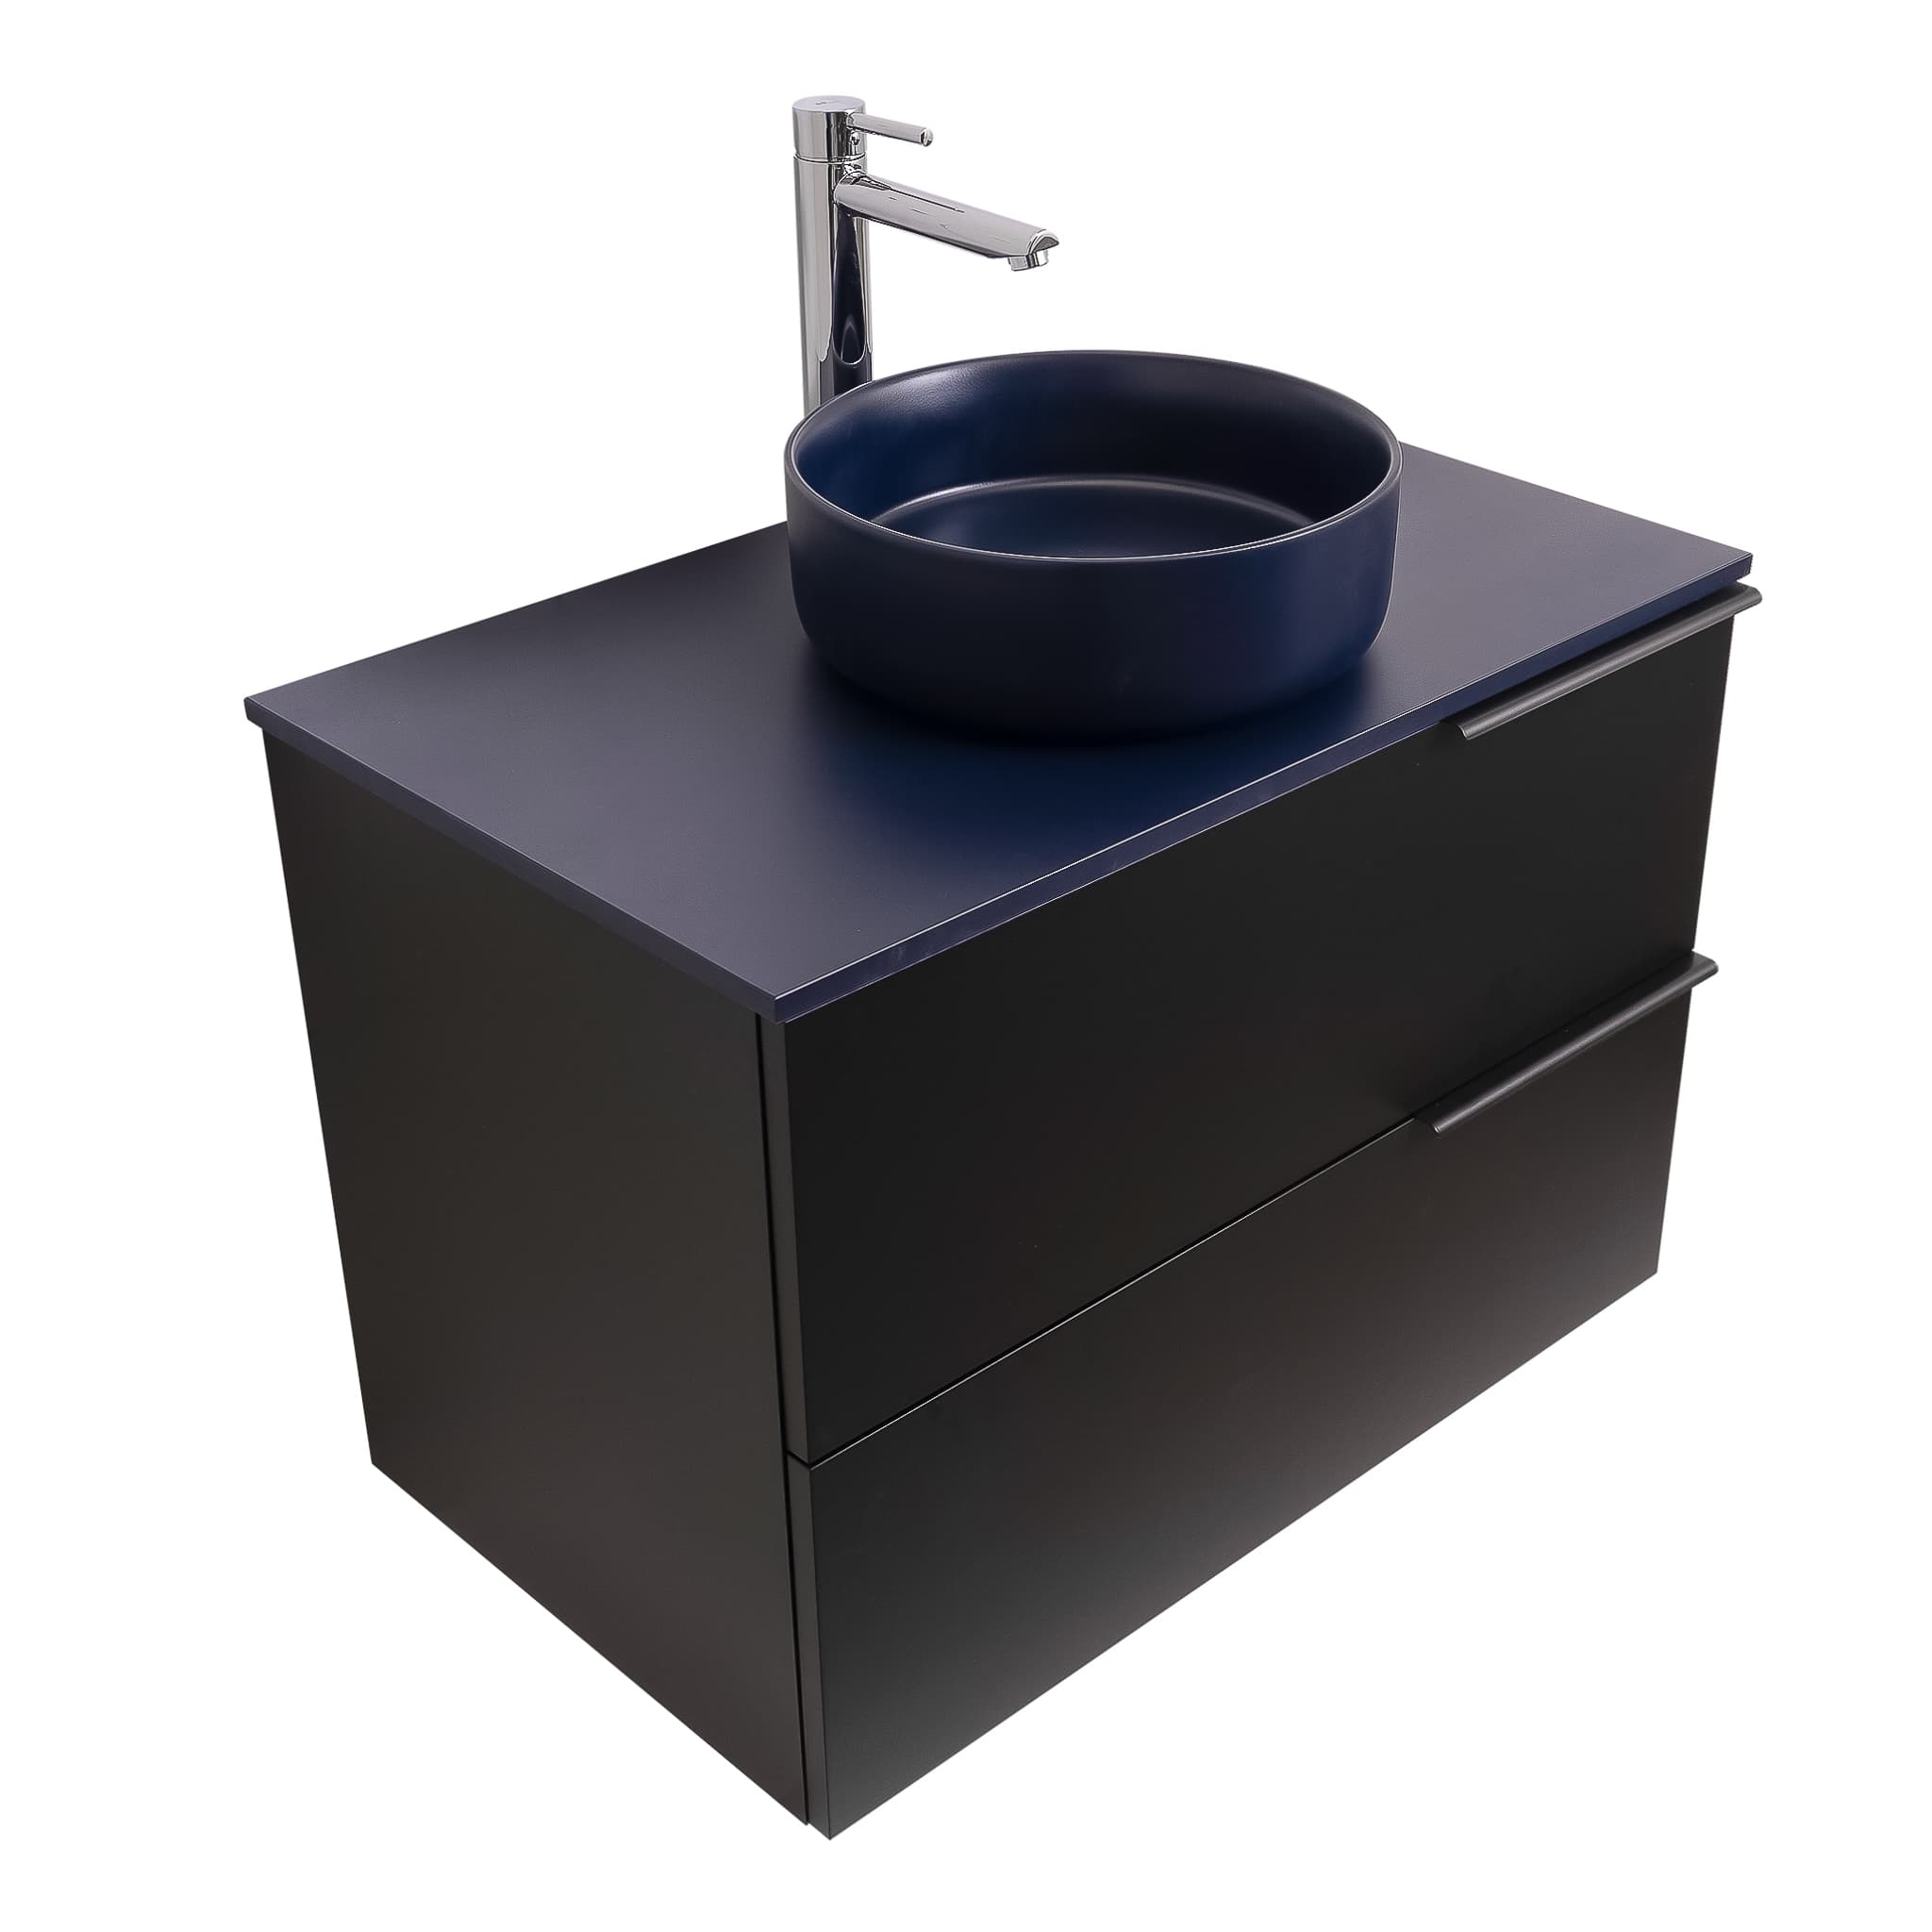 Mallorca 35.5 Matte Black Cabinet, Ares Navy Blue Top And Ares Navy Blue Ceramic Basin, Wall Mounted Modern Vanity Set